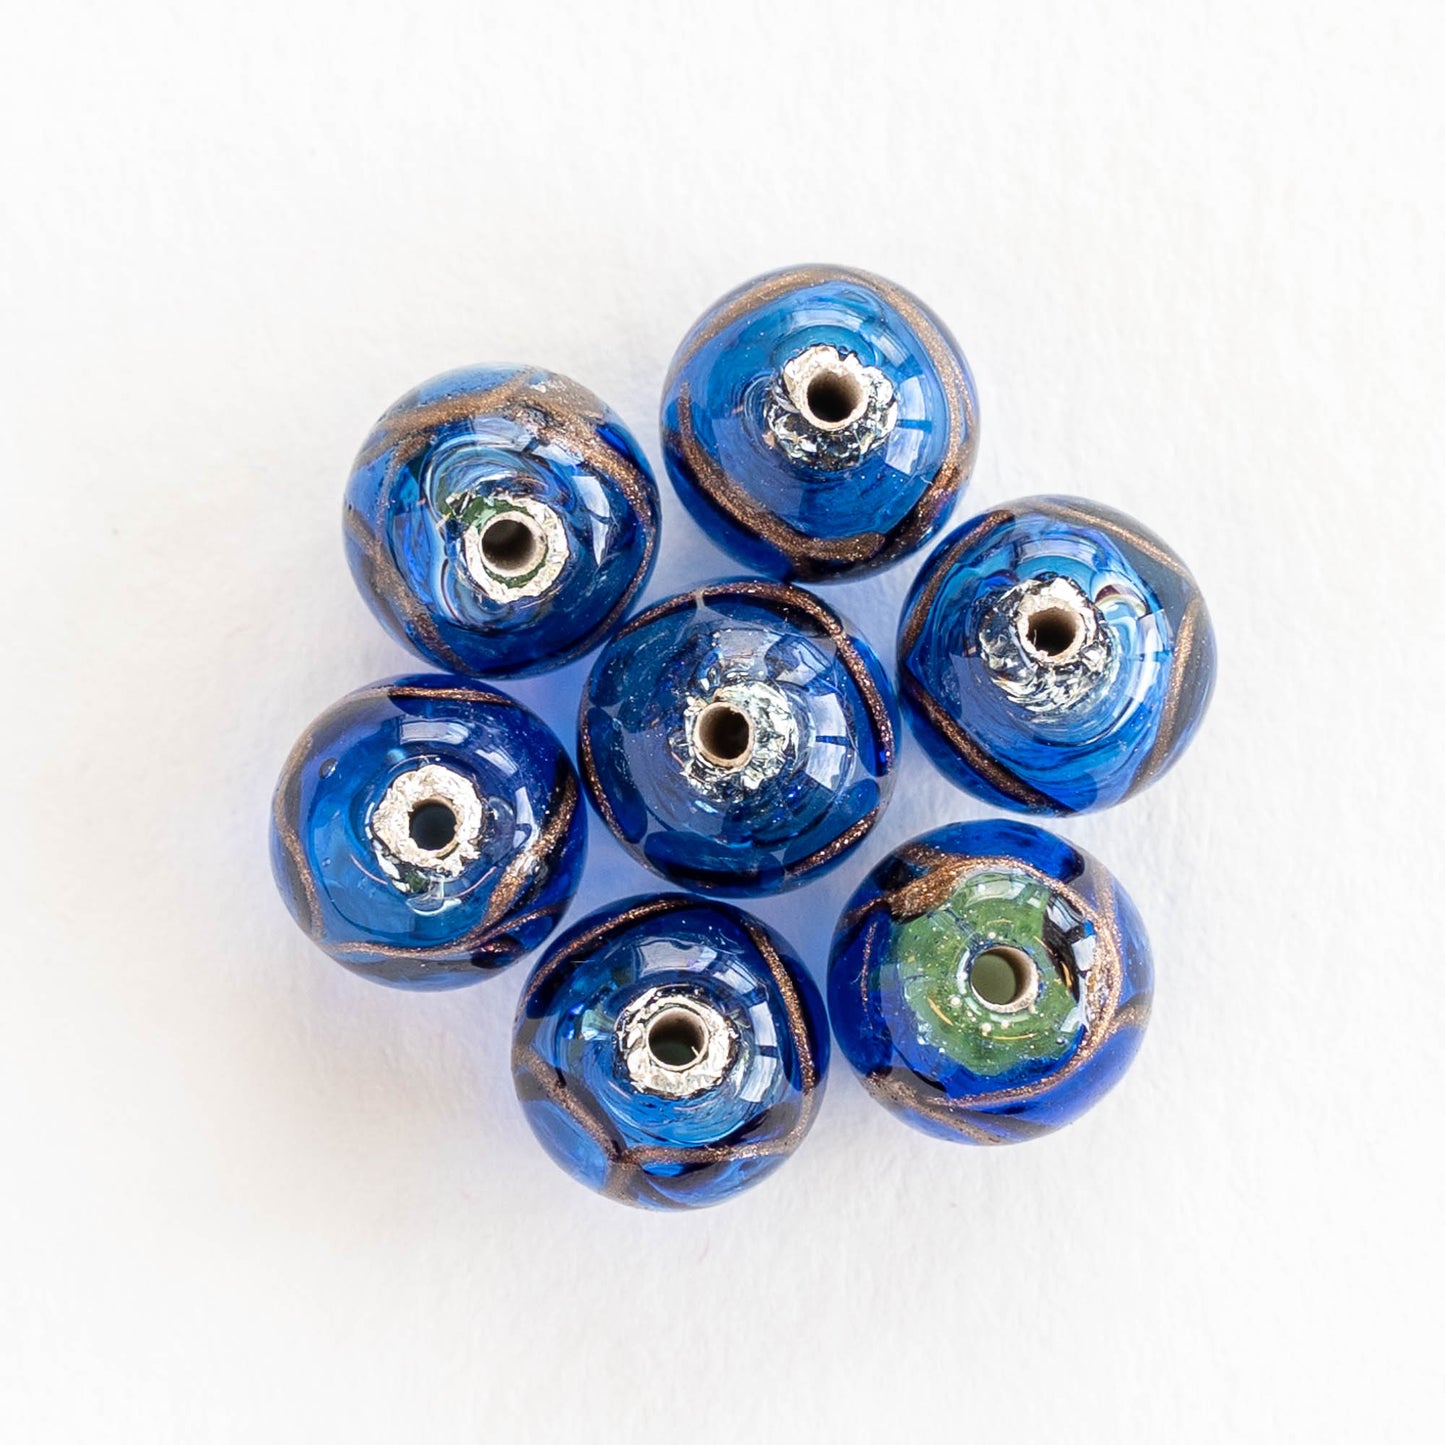 MIC Sky Blue Gold Silver Foil Alphabet Lampwork Glass Beads With Large Hole  For B Pretty Beads For Bracelets From Xuan16888, $0.41